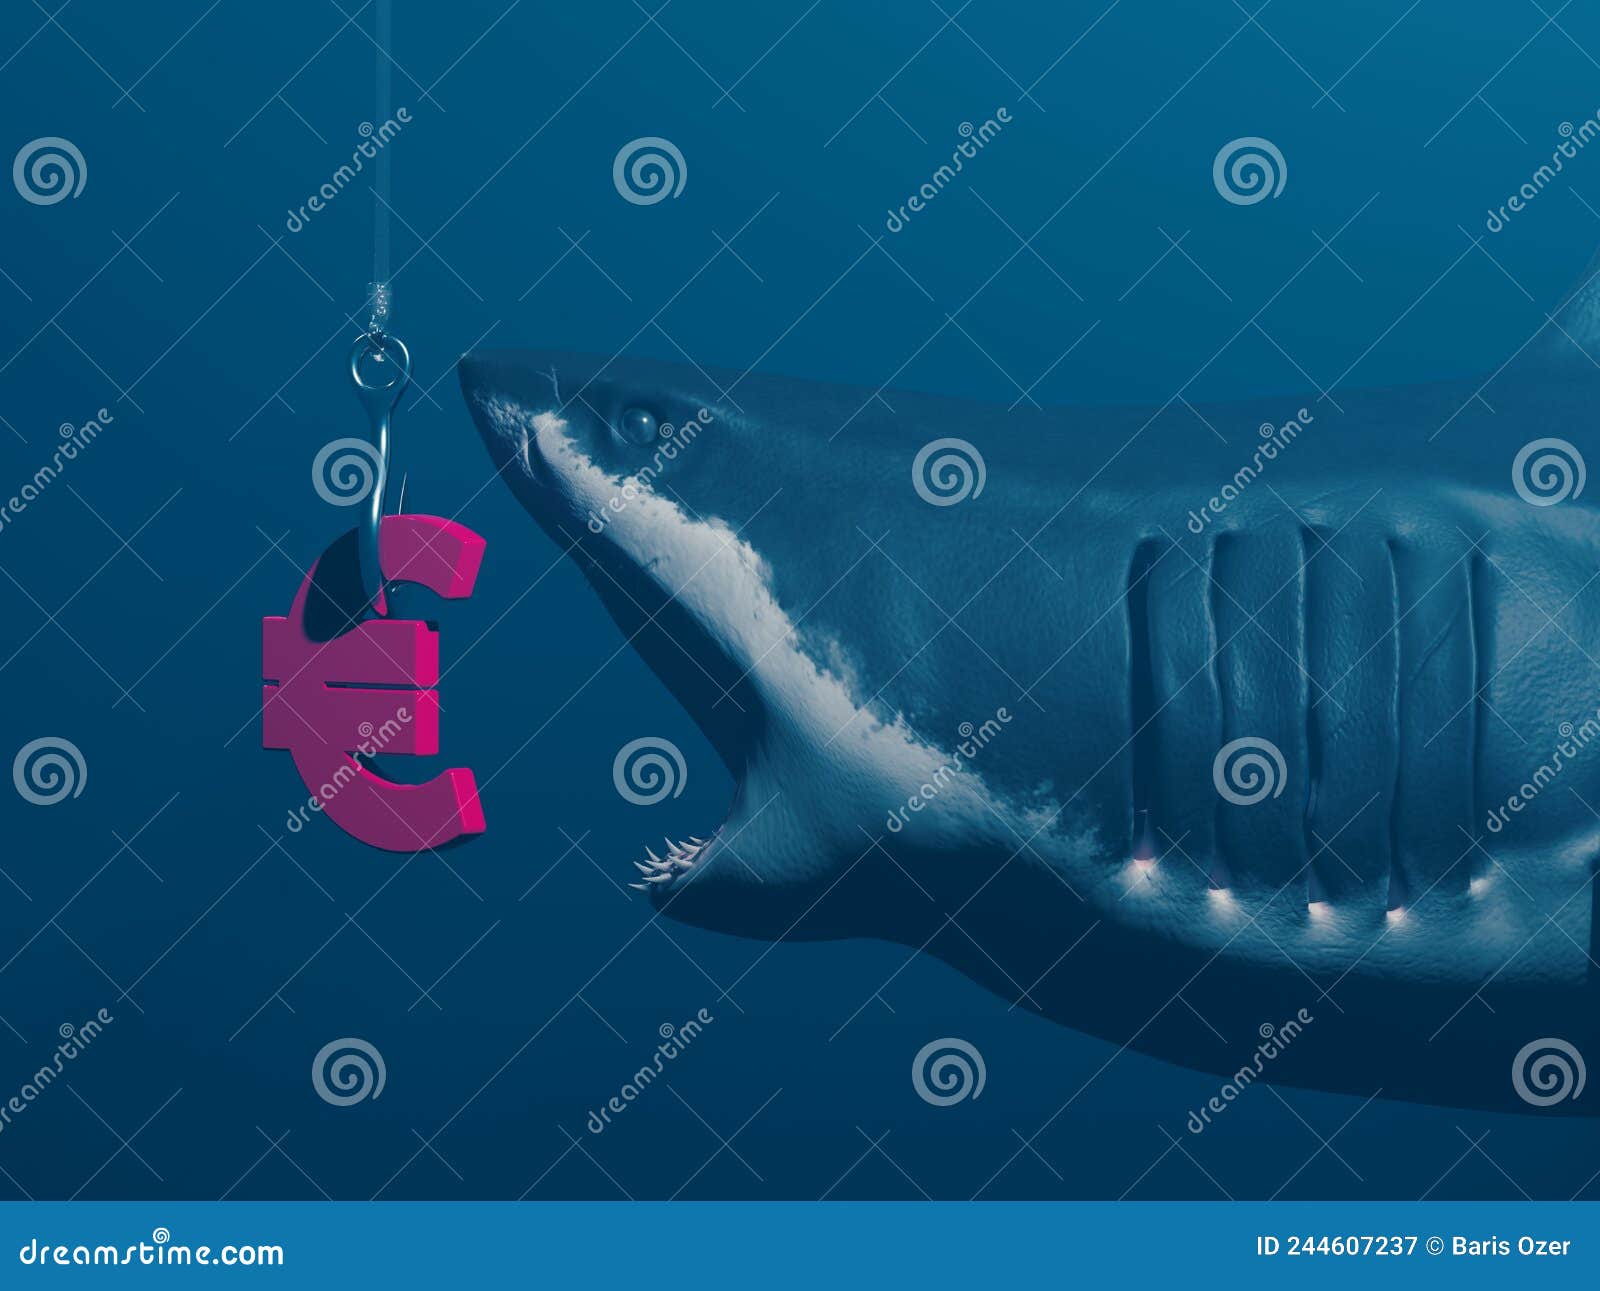 The Great White Shark, the Red-colored Euro Symbol, and the Fishing Rod.  Stock Illustration - Illustration of blue, euro: 244607237